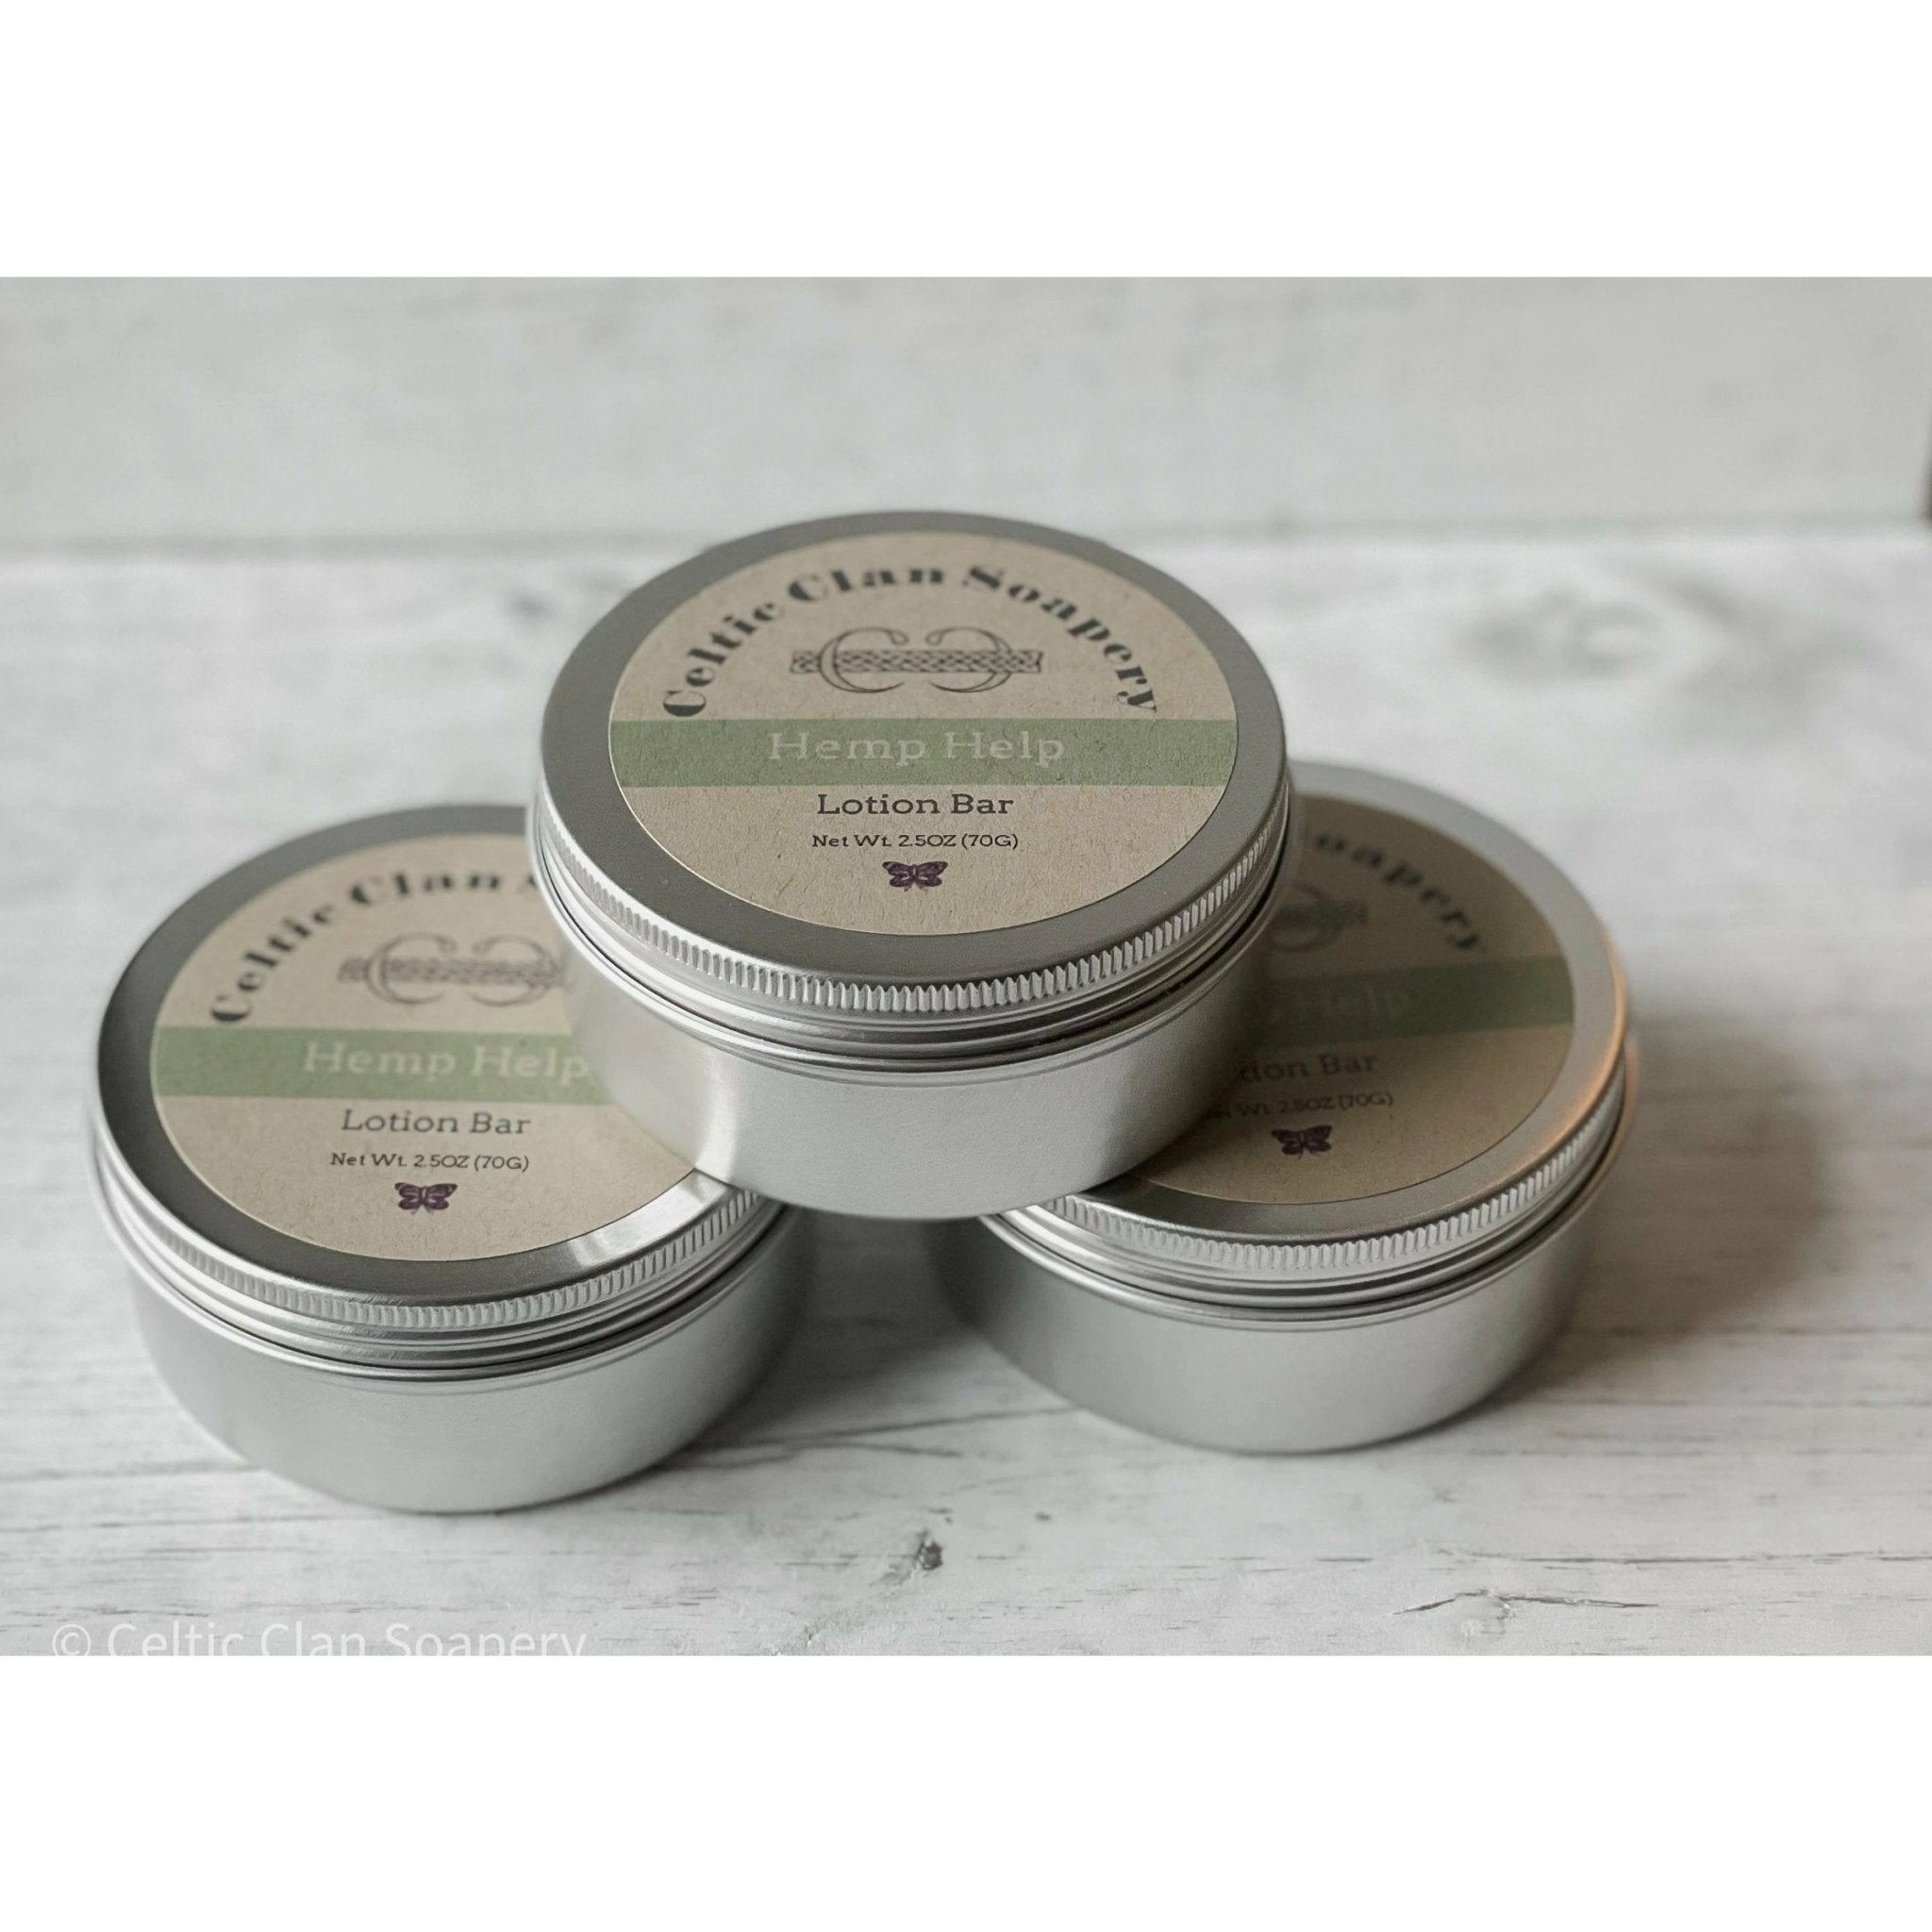 Hemp Help | Hemp Seed All Natural Lotion Bar | Essential Oil Blends or Unscented - Celtic Clan Soapery LLC